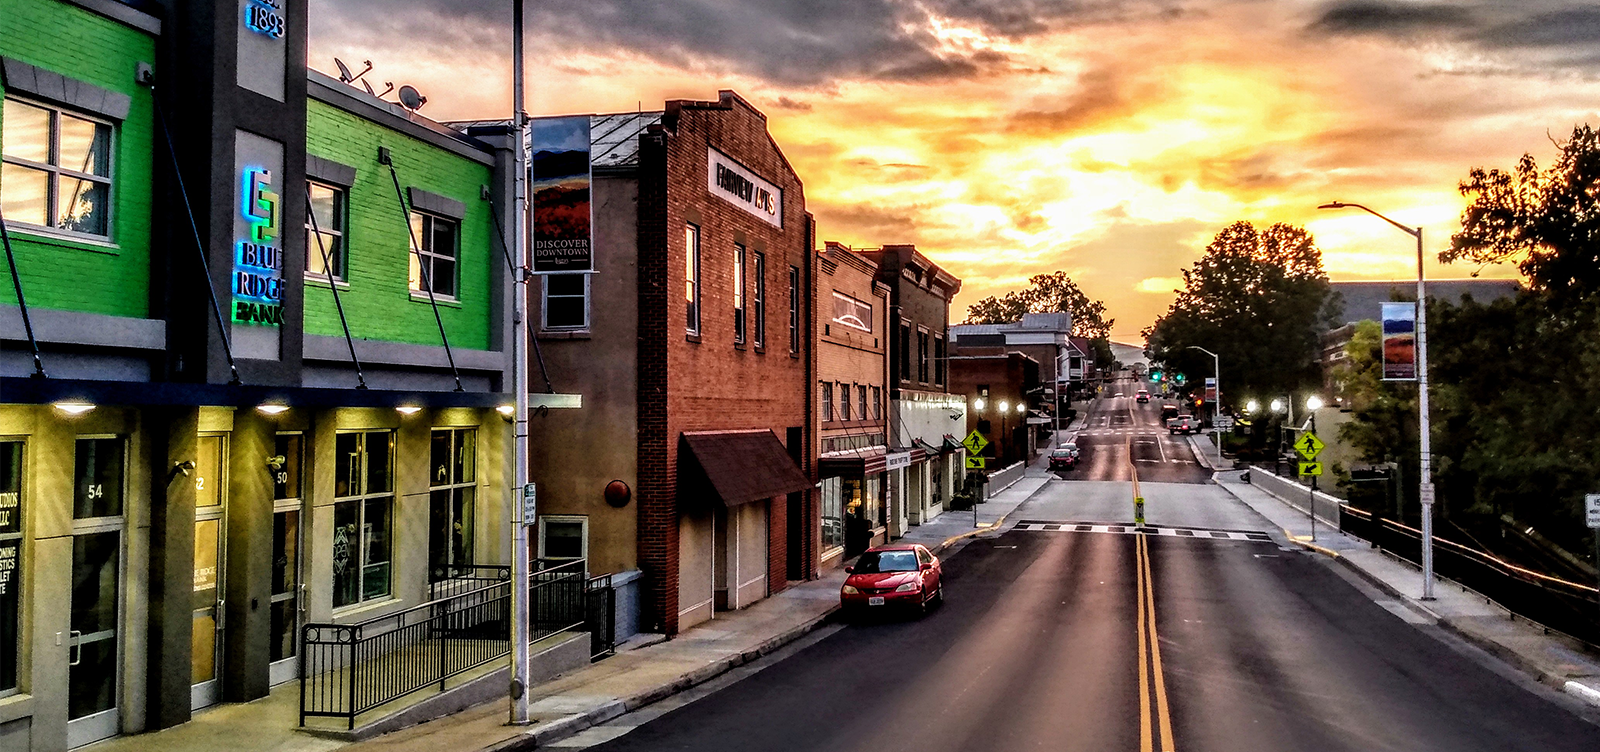 Downtown Luray, Page County